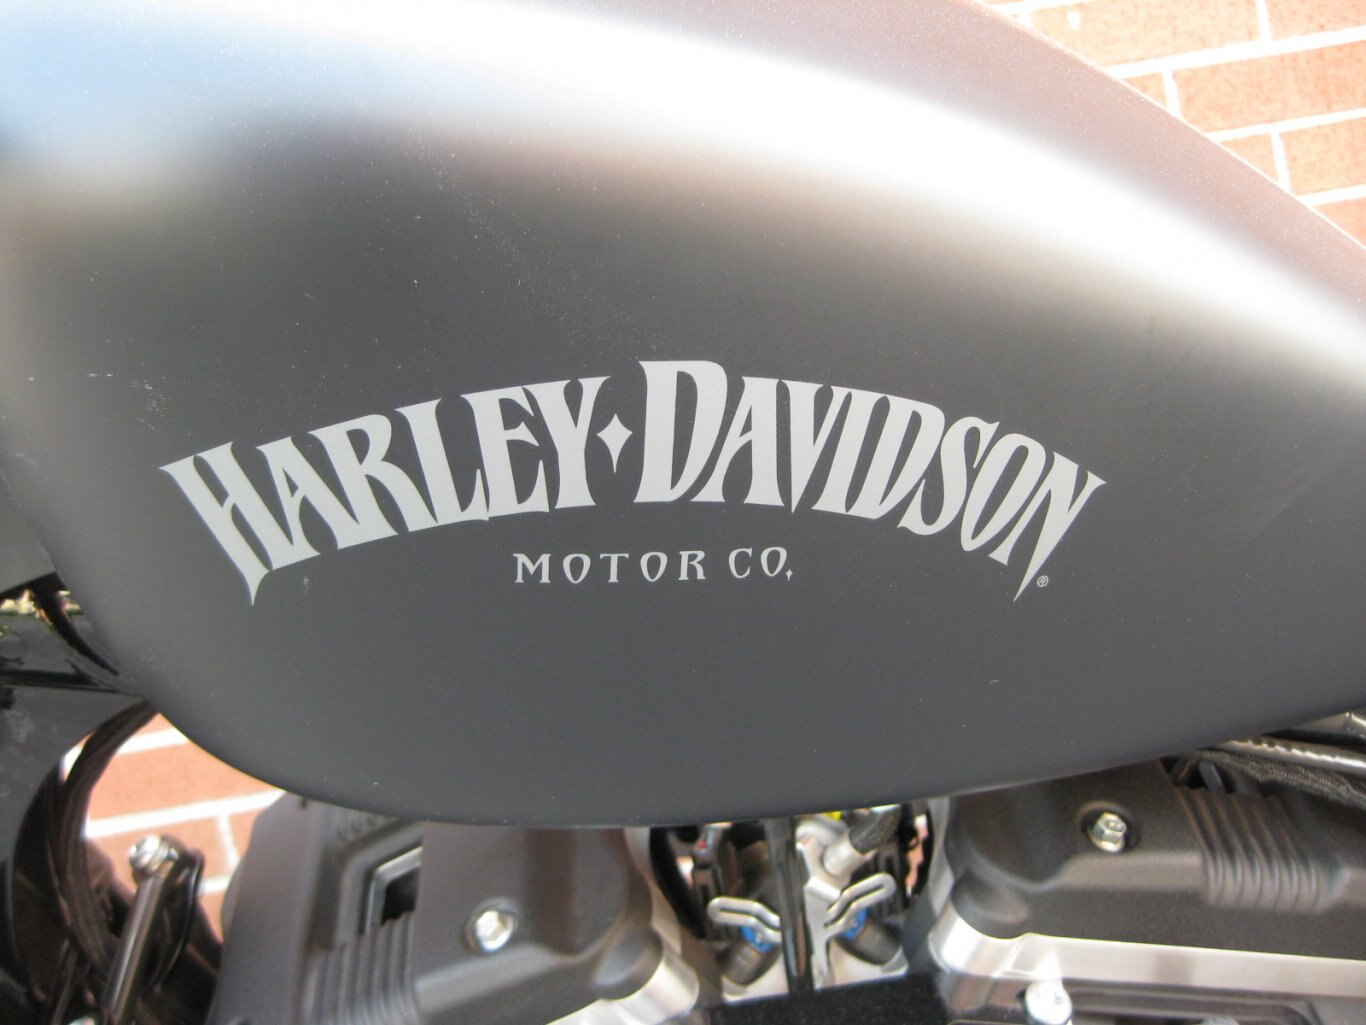 Customized 2020 Harley Davidson XL883N Iron SOLD AND CONGRATS TO TO THE “MYSTERY RIDER”!! WELCOME TO THE “DARK SIDE” ON THIS “DARK HORSE” MUSCLE HARLEY DAVIDSON IRON TWO WHEEL FREEDOM MACHINE WITH THANKS FROM GARY & TEAM CYCLE WORLD!!!!